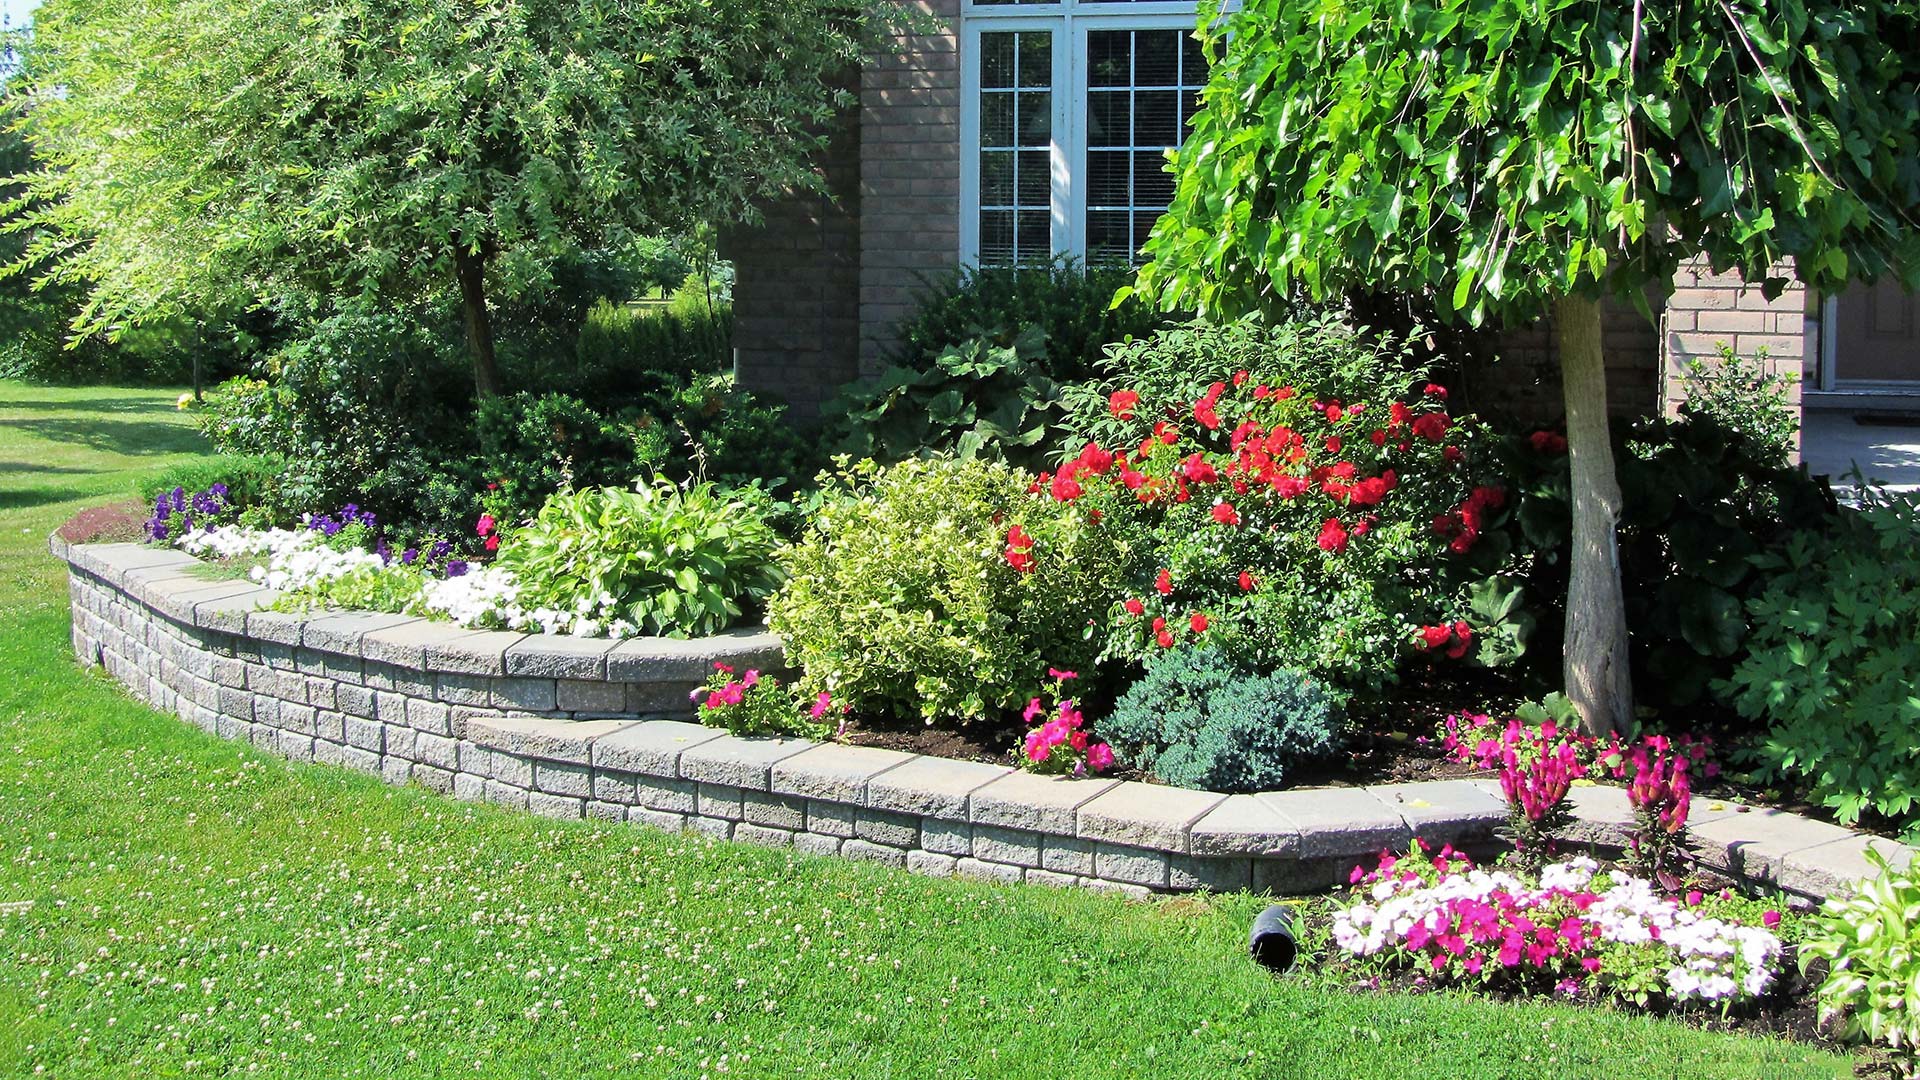 How to Keep Your Landscaping Plants Healthy & Looking Their Best